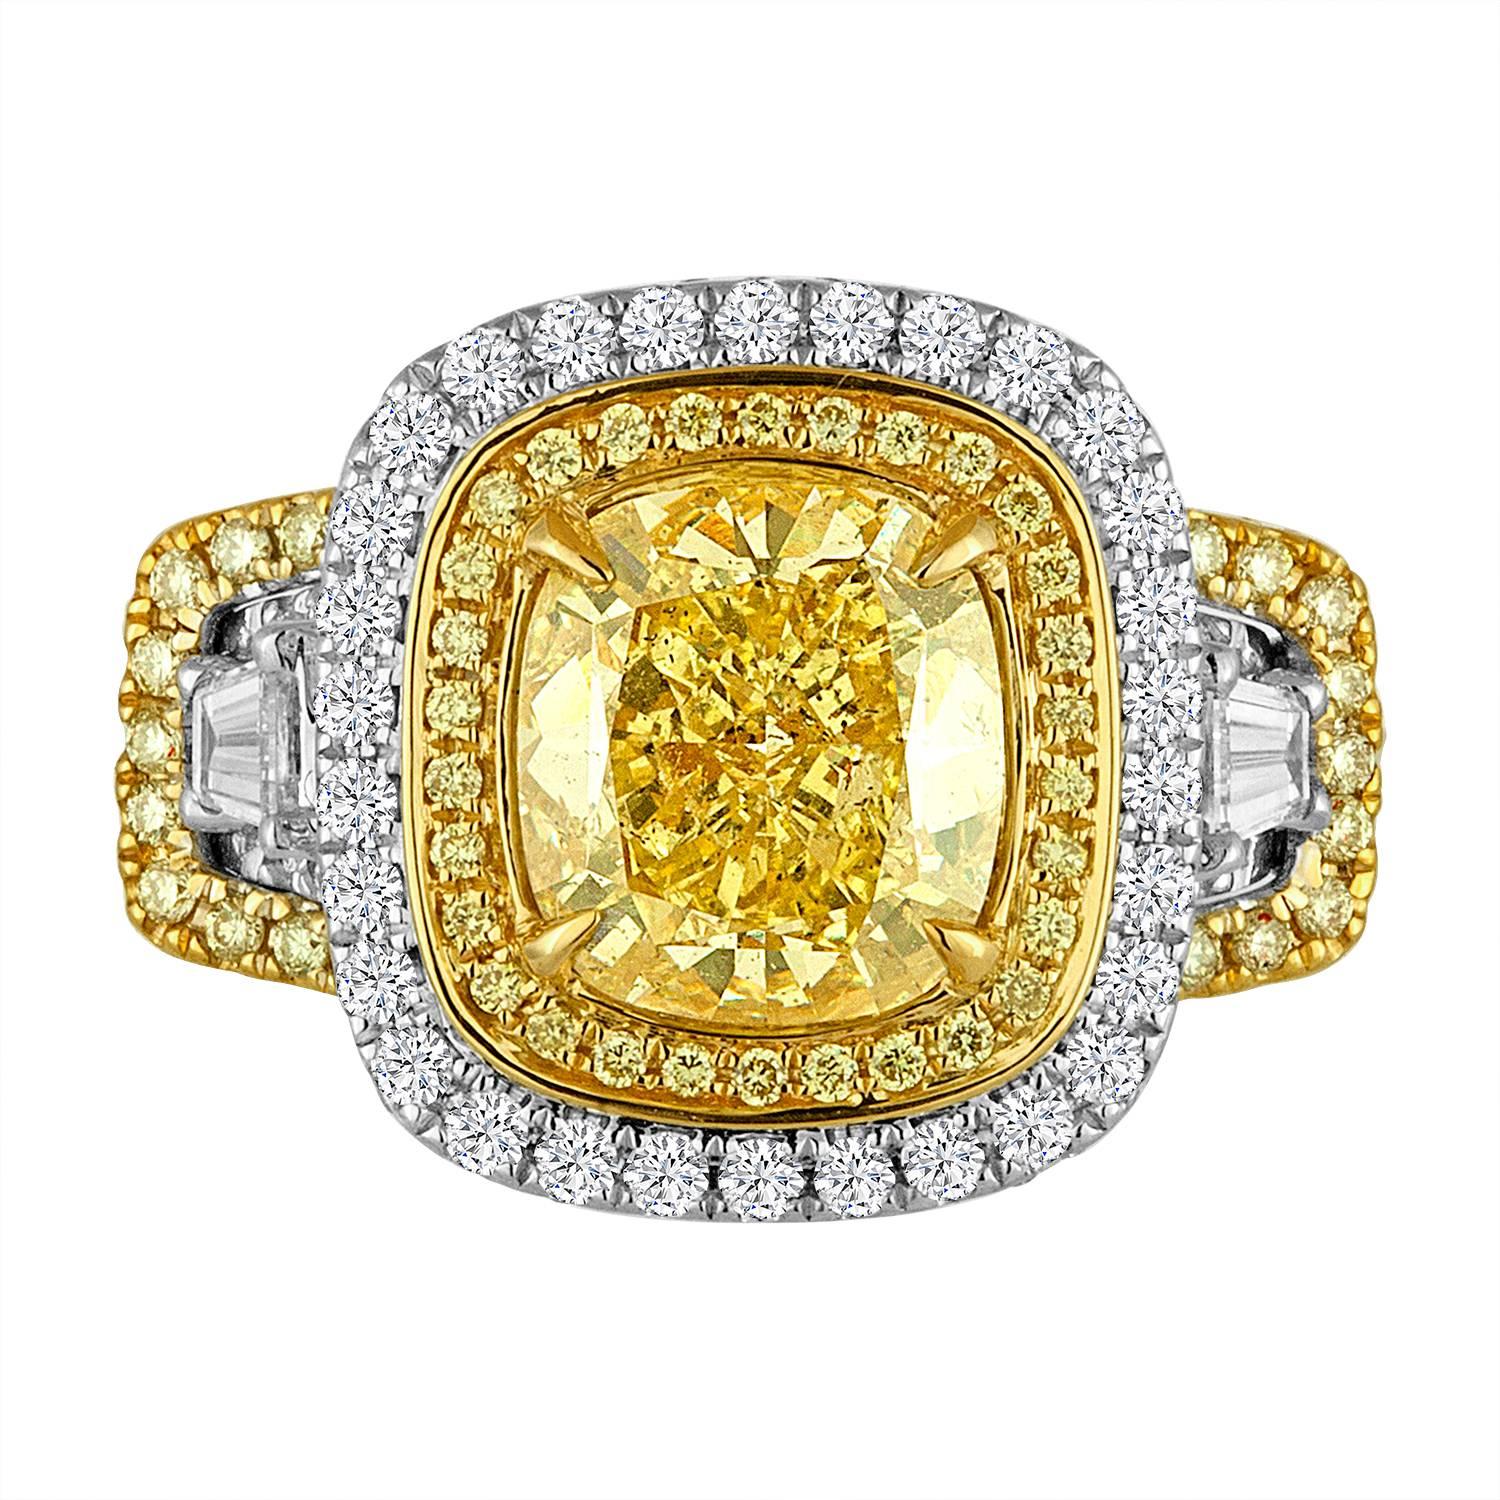 Gorgeous GIA  Certified Natural Fancy Yellow Even 3.04 Carat encircled in a double Halo of Natural Fancy Yellow Rounds 0.75 Carats Round and White Diamond Rounds 1.20 Carat Flanked by 2 White diamond Tapers 0.54 Carat in a One of a Kind very